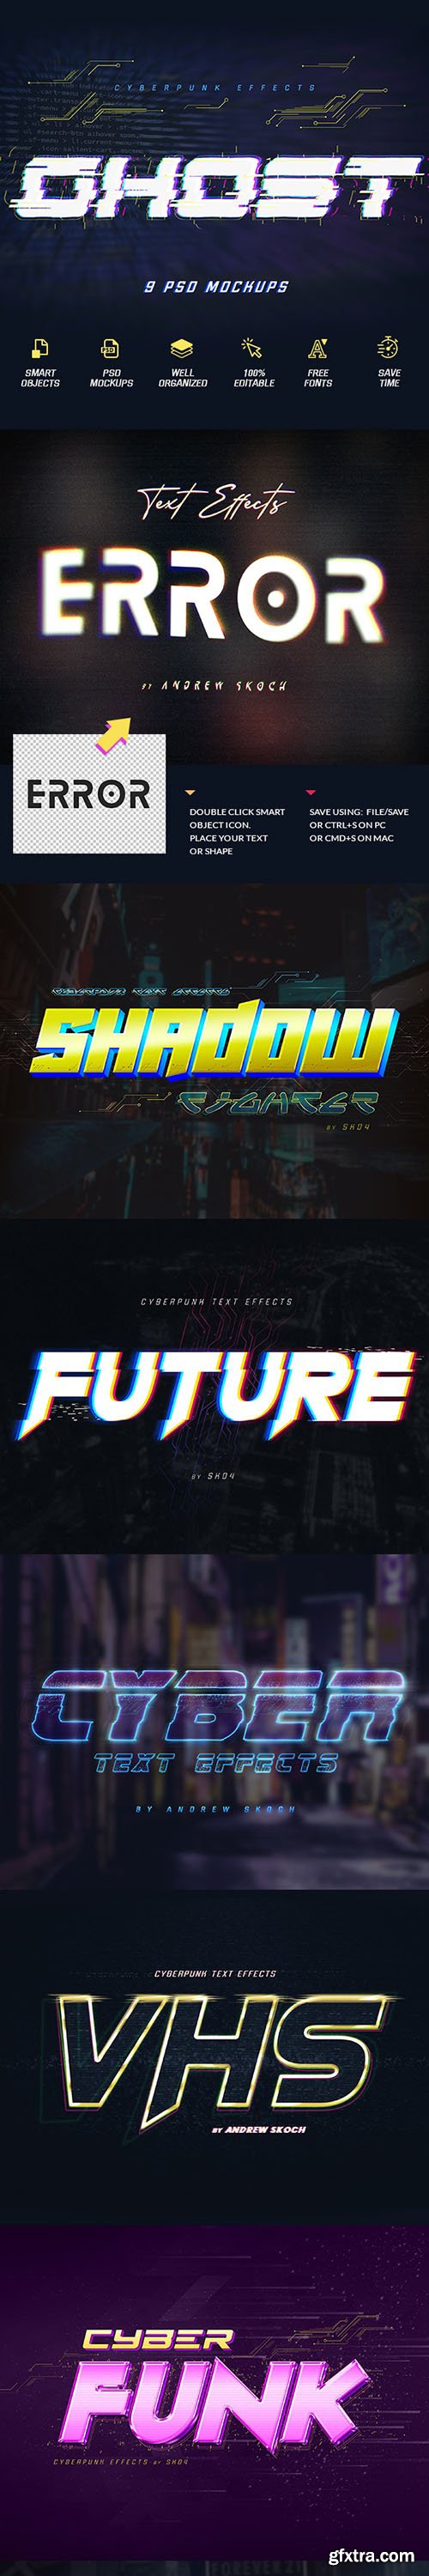 Graphicriver - Cyberpunk Text Effects vol 2 25668840